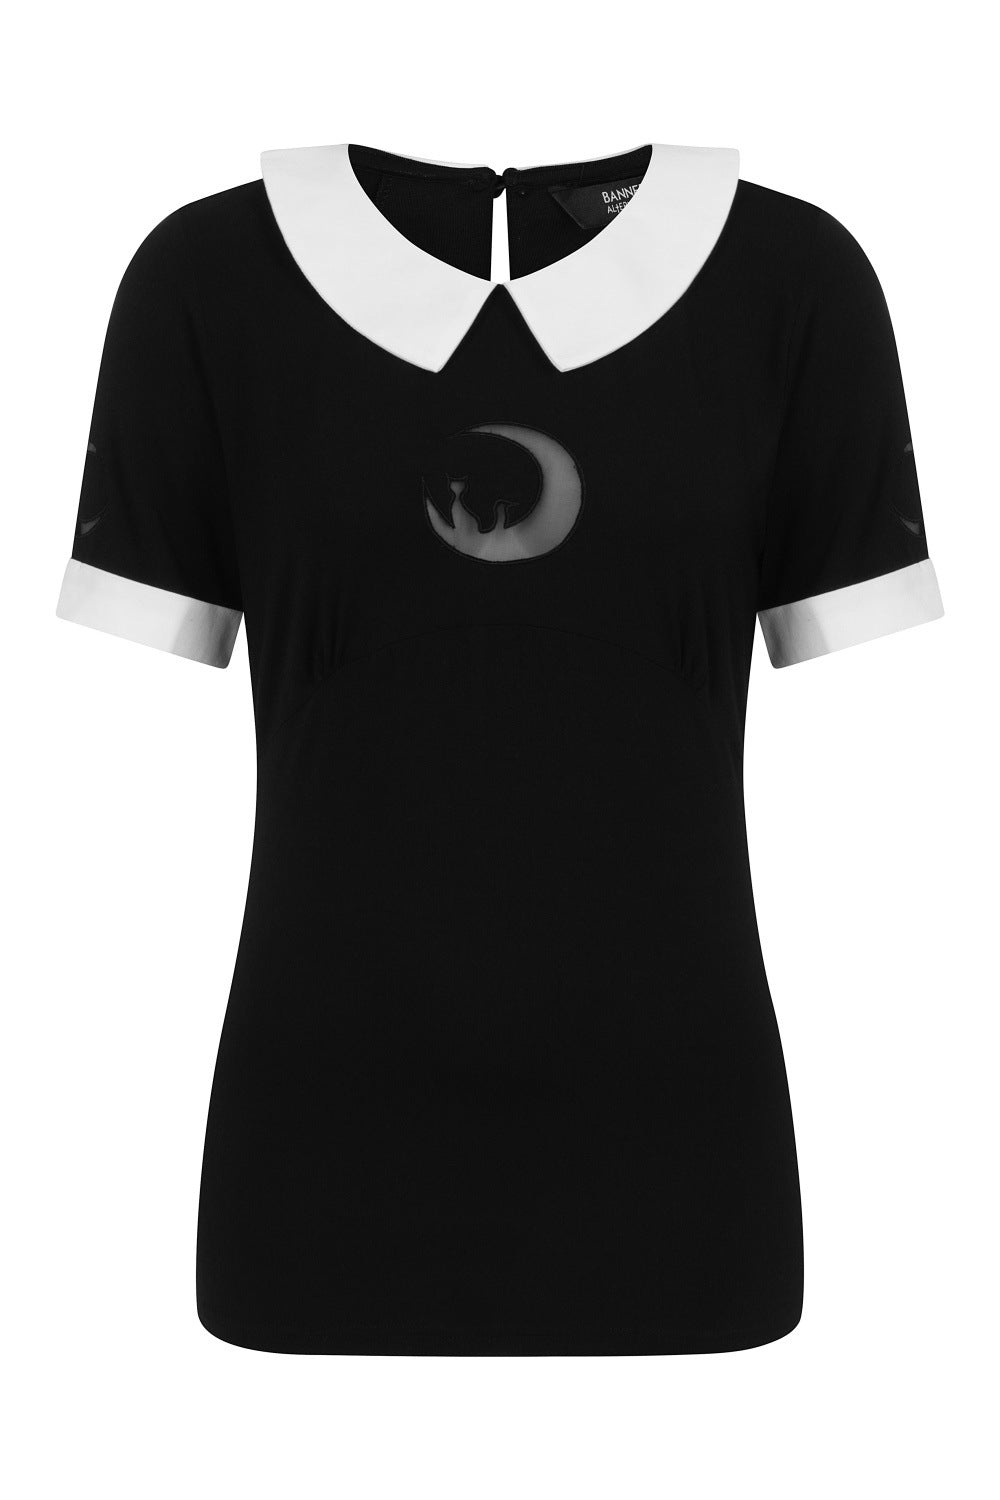 Black short sleeved top with white collar and cuffs. Mesh panel with cat silhouette on a half moon.  